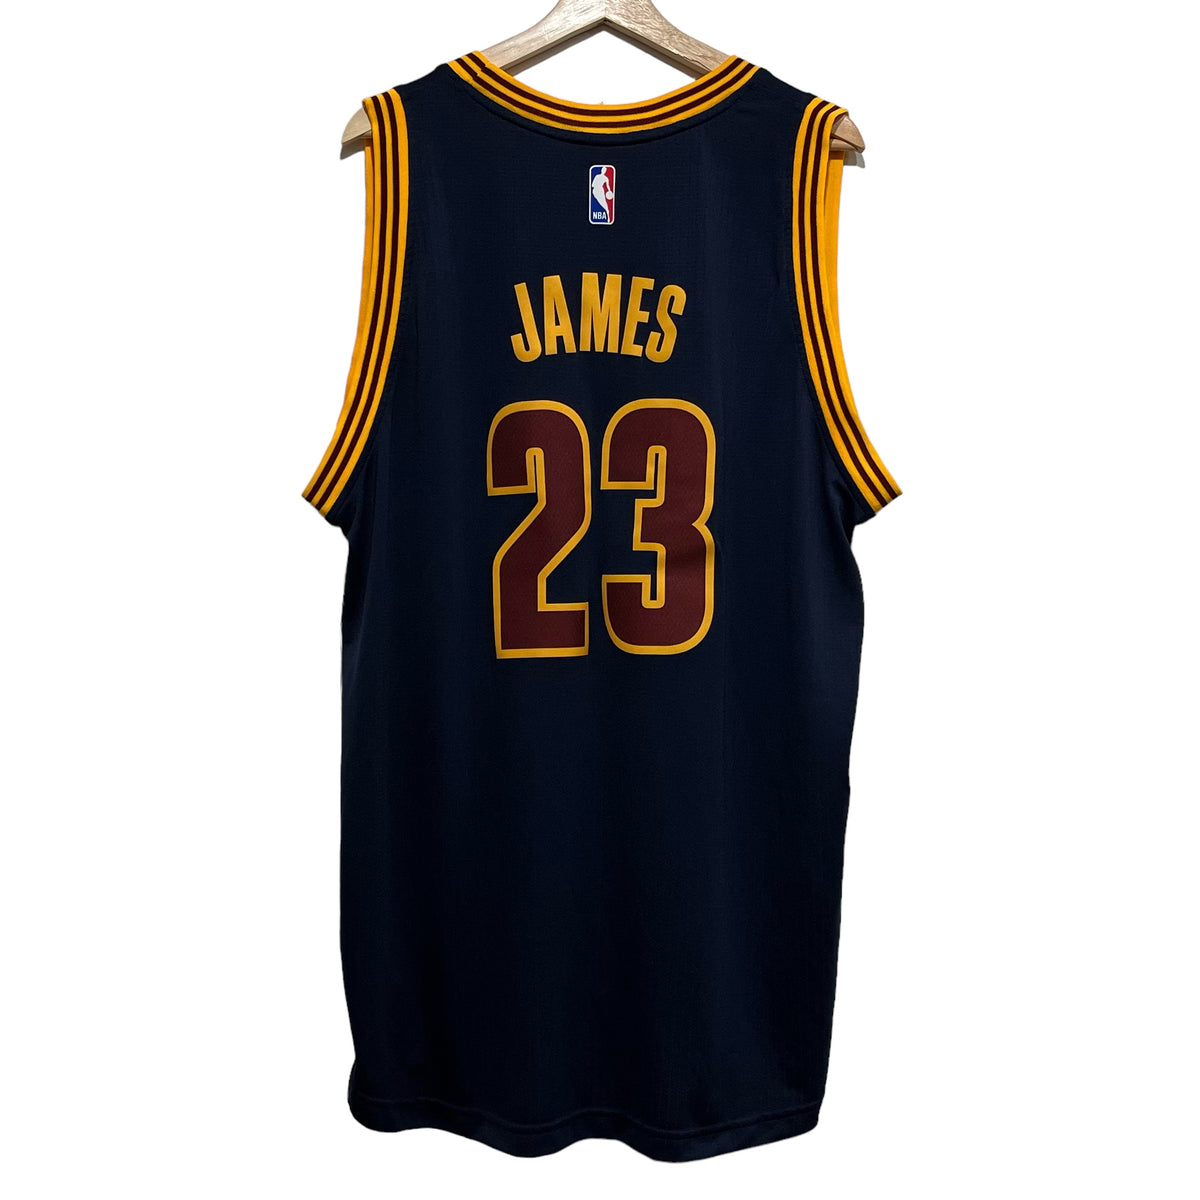 LeBron James Cleveland Cavaliers Jersey Youth XL – Laundry